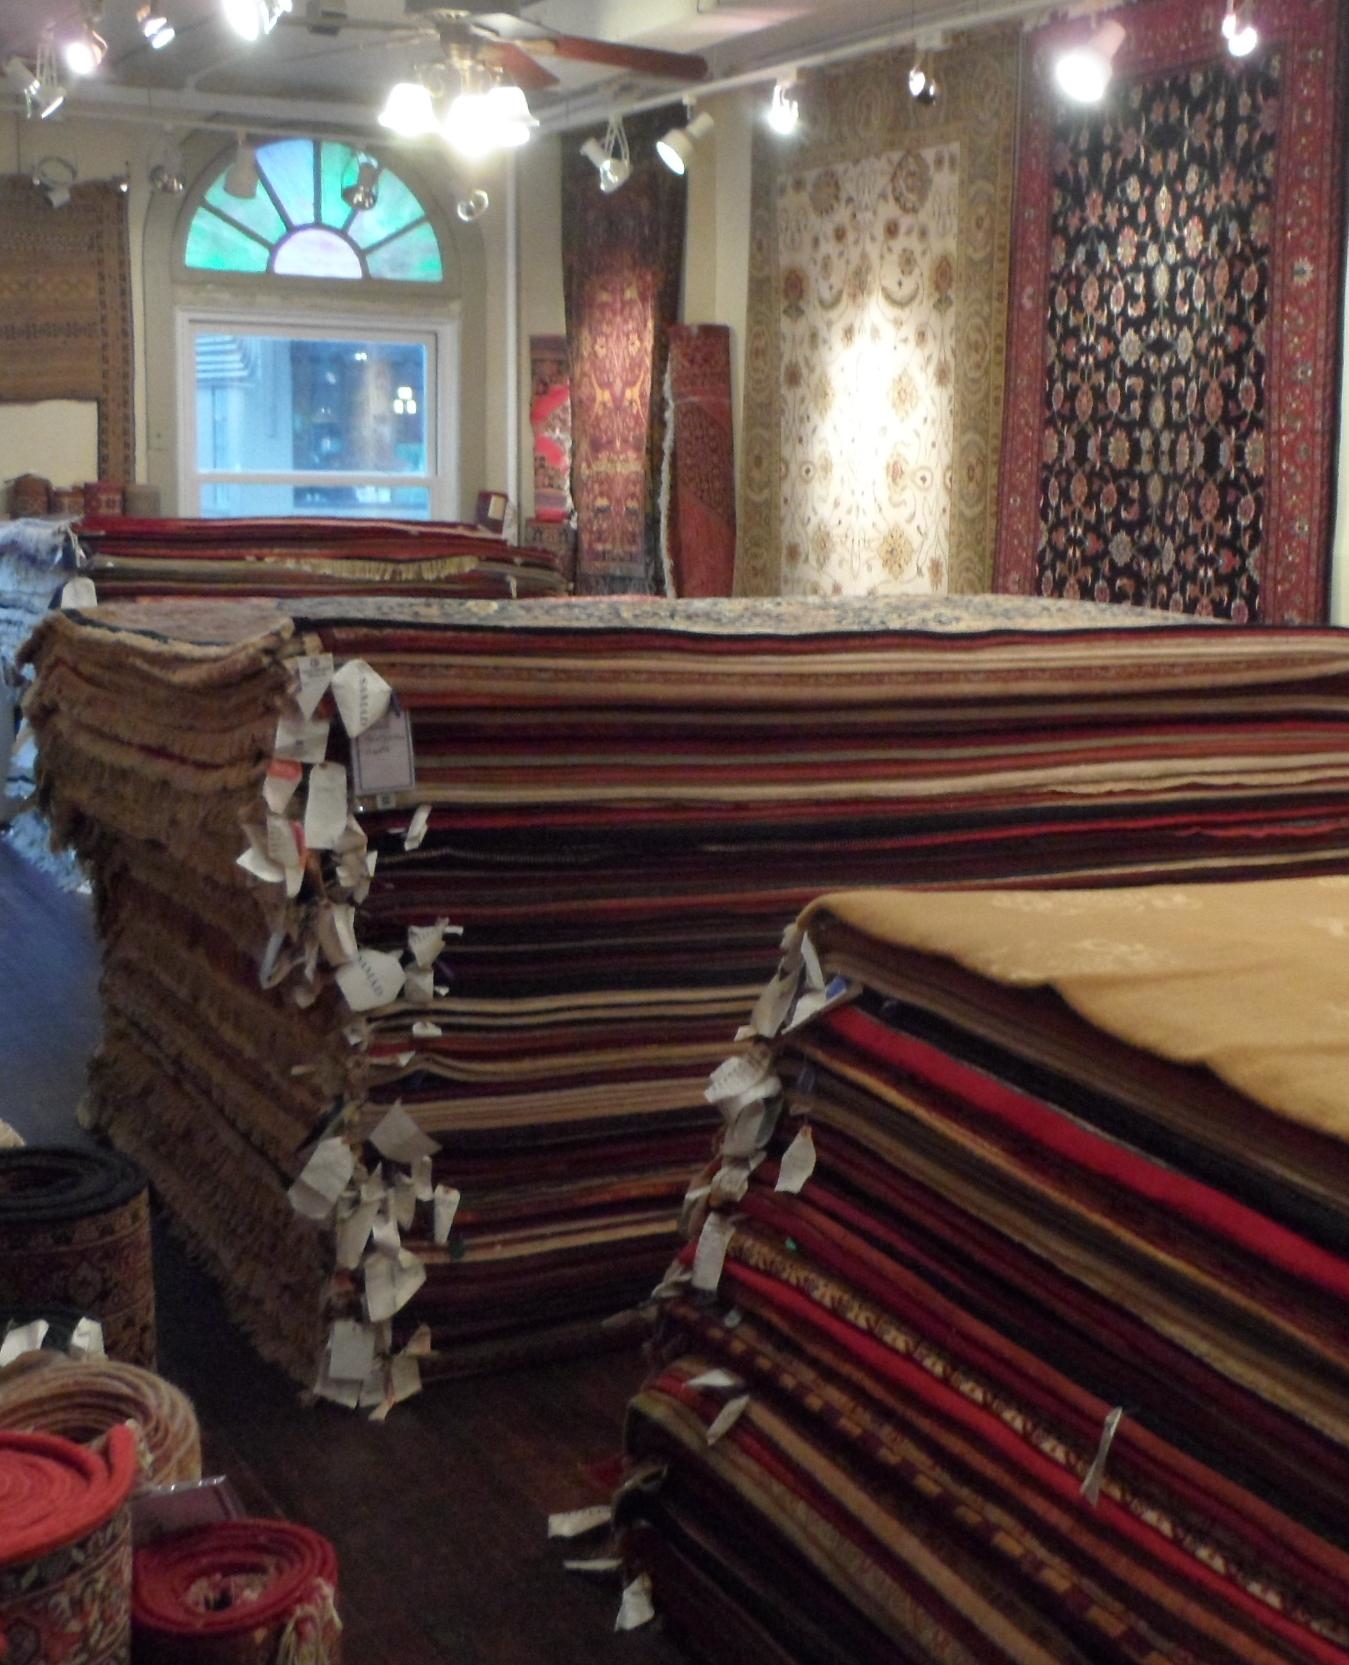 We have a large collection of rugs from around the world.